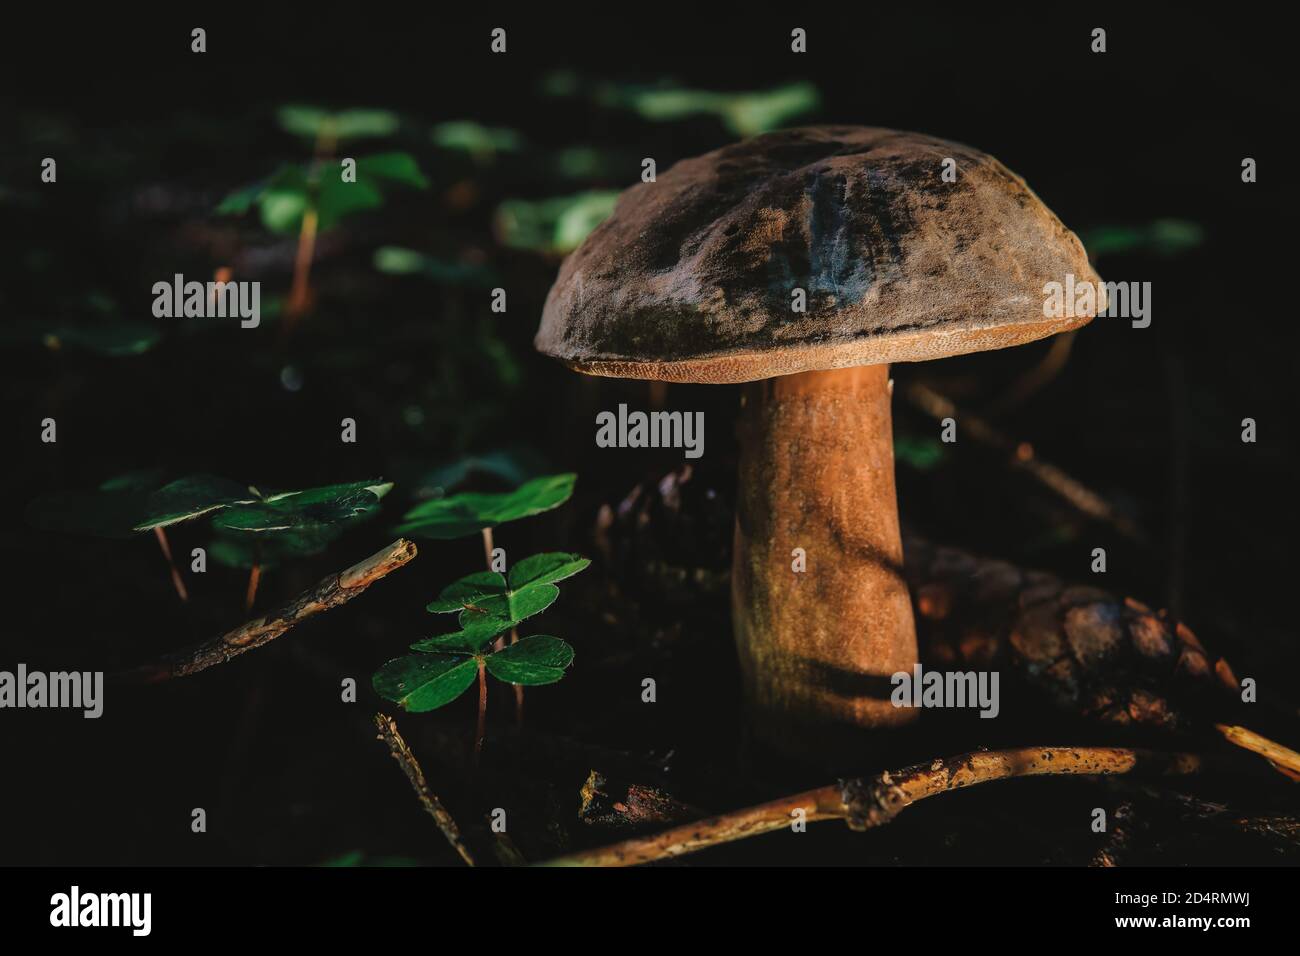 Tylopilus felleus, commonly known as the bitter bolete or the bitter tylopilus, is a fungus of the bolete family. Stock Photo